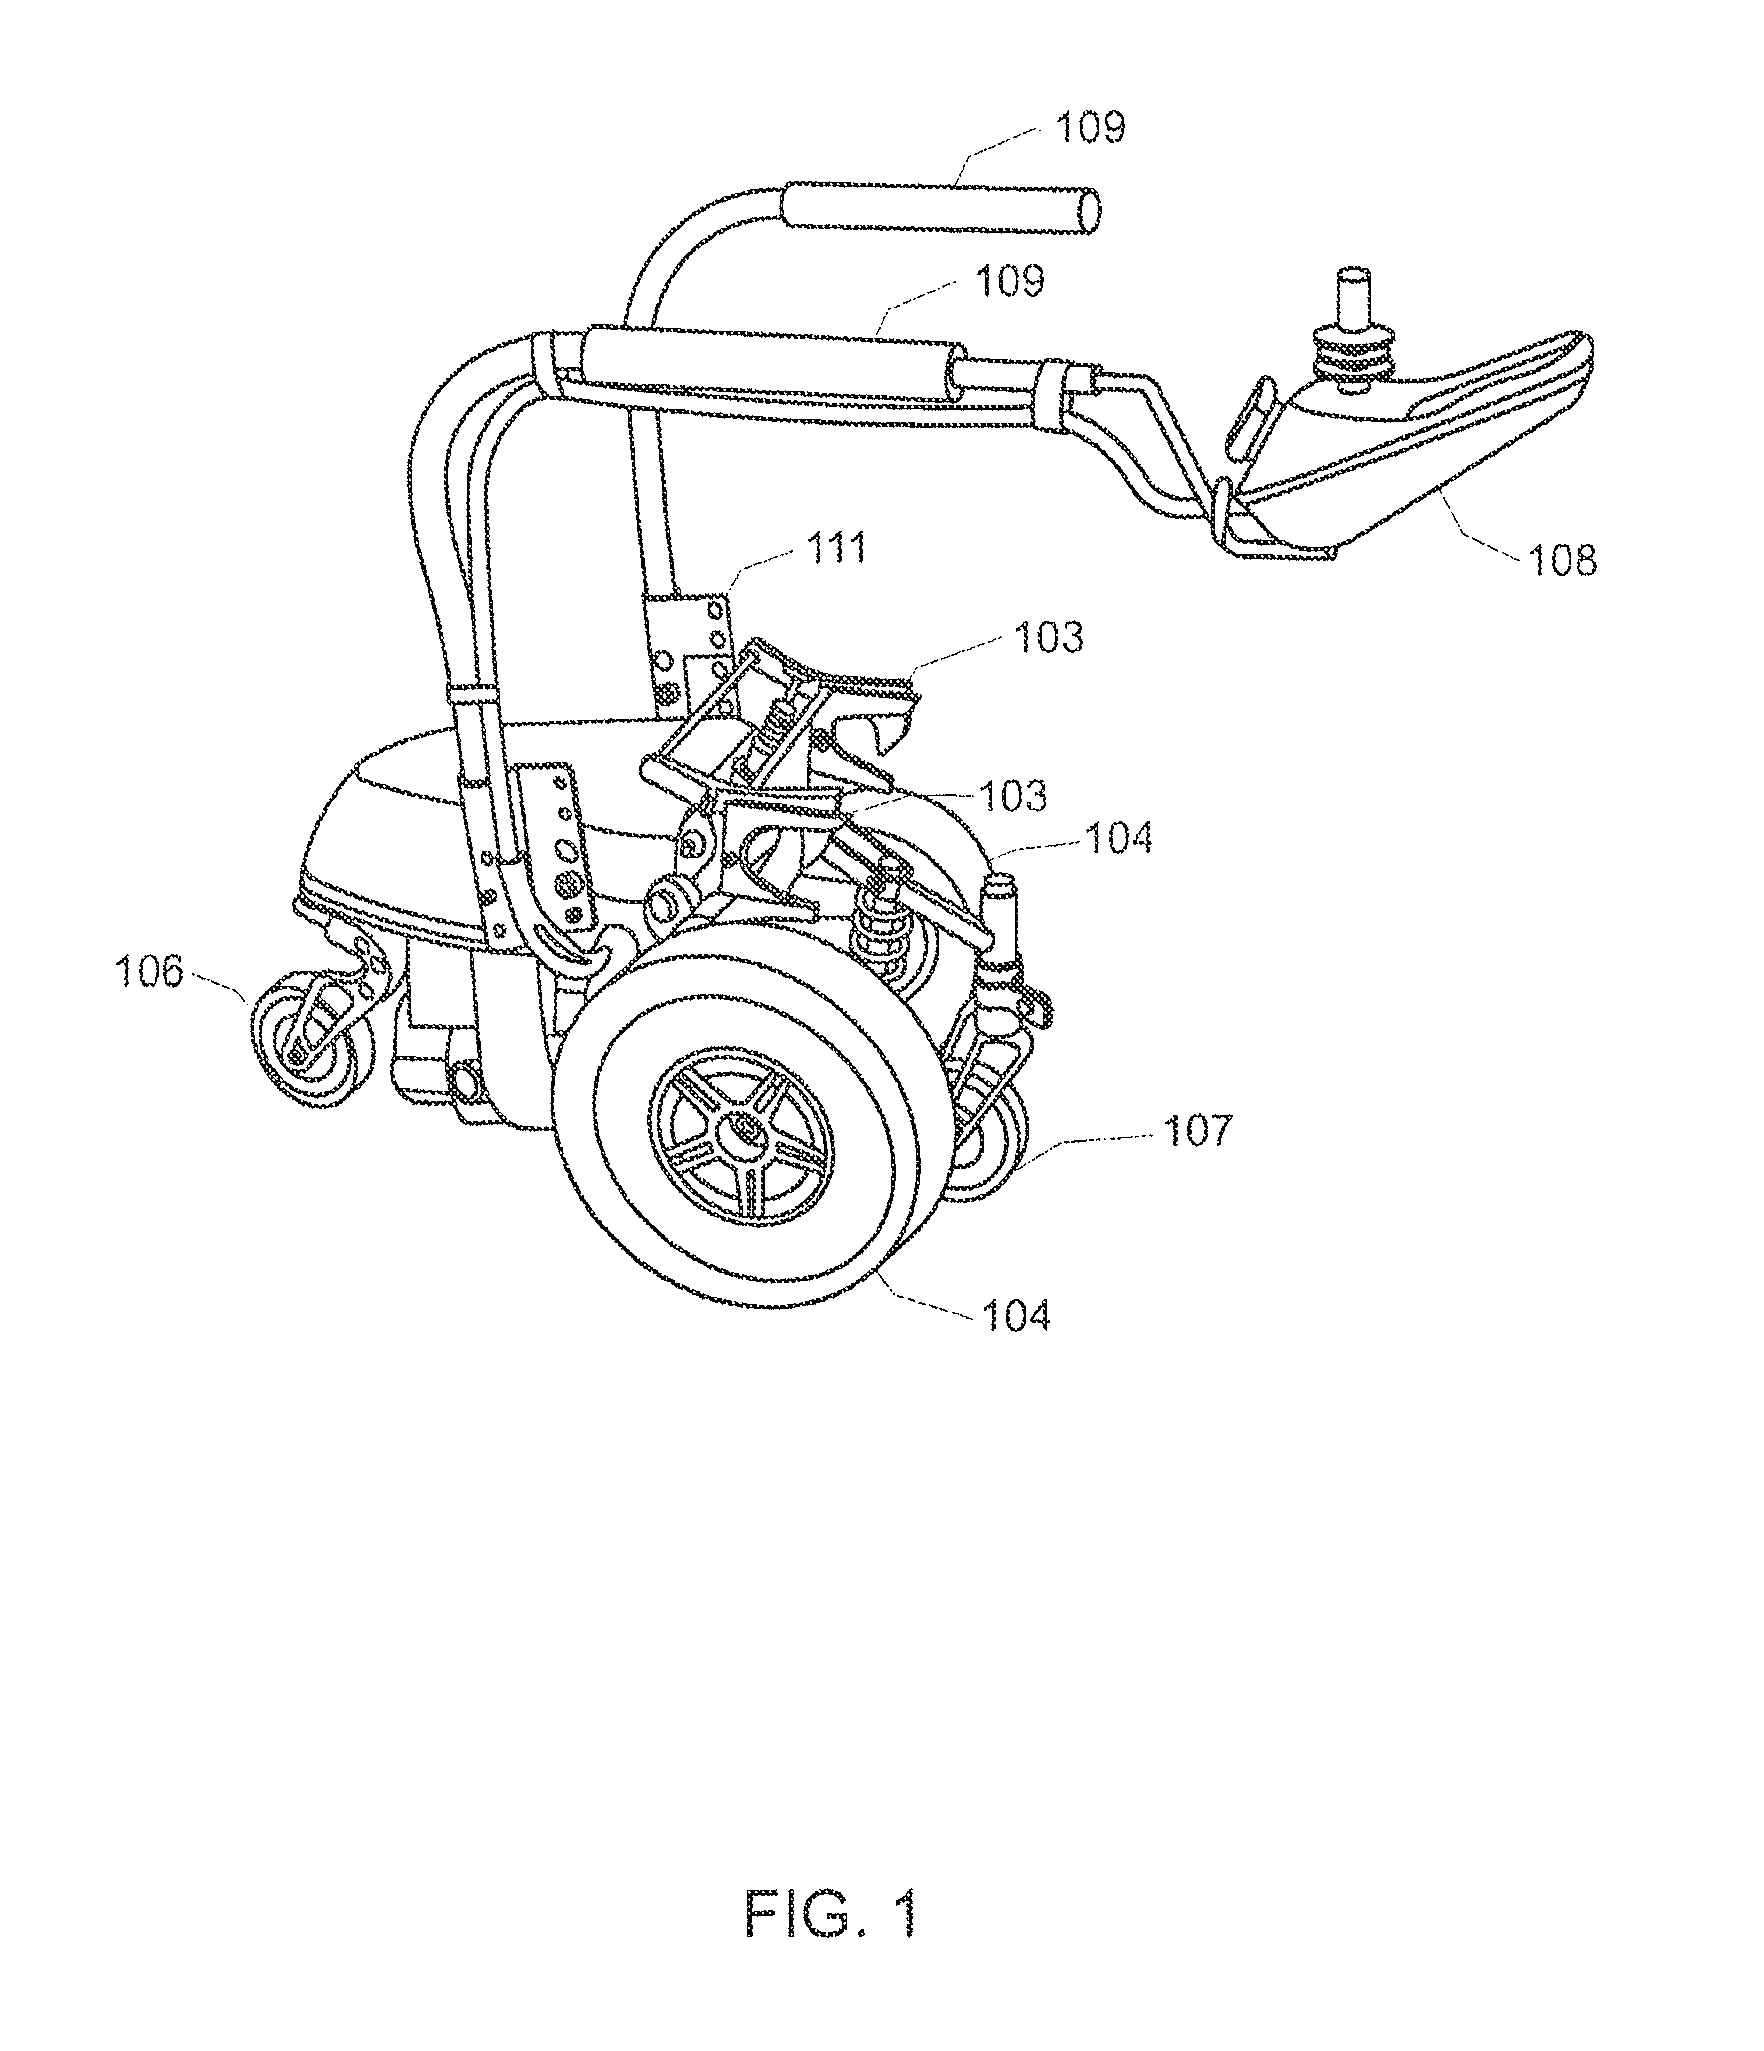 Power add-on device for manual wheelchair